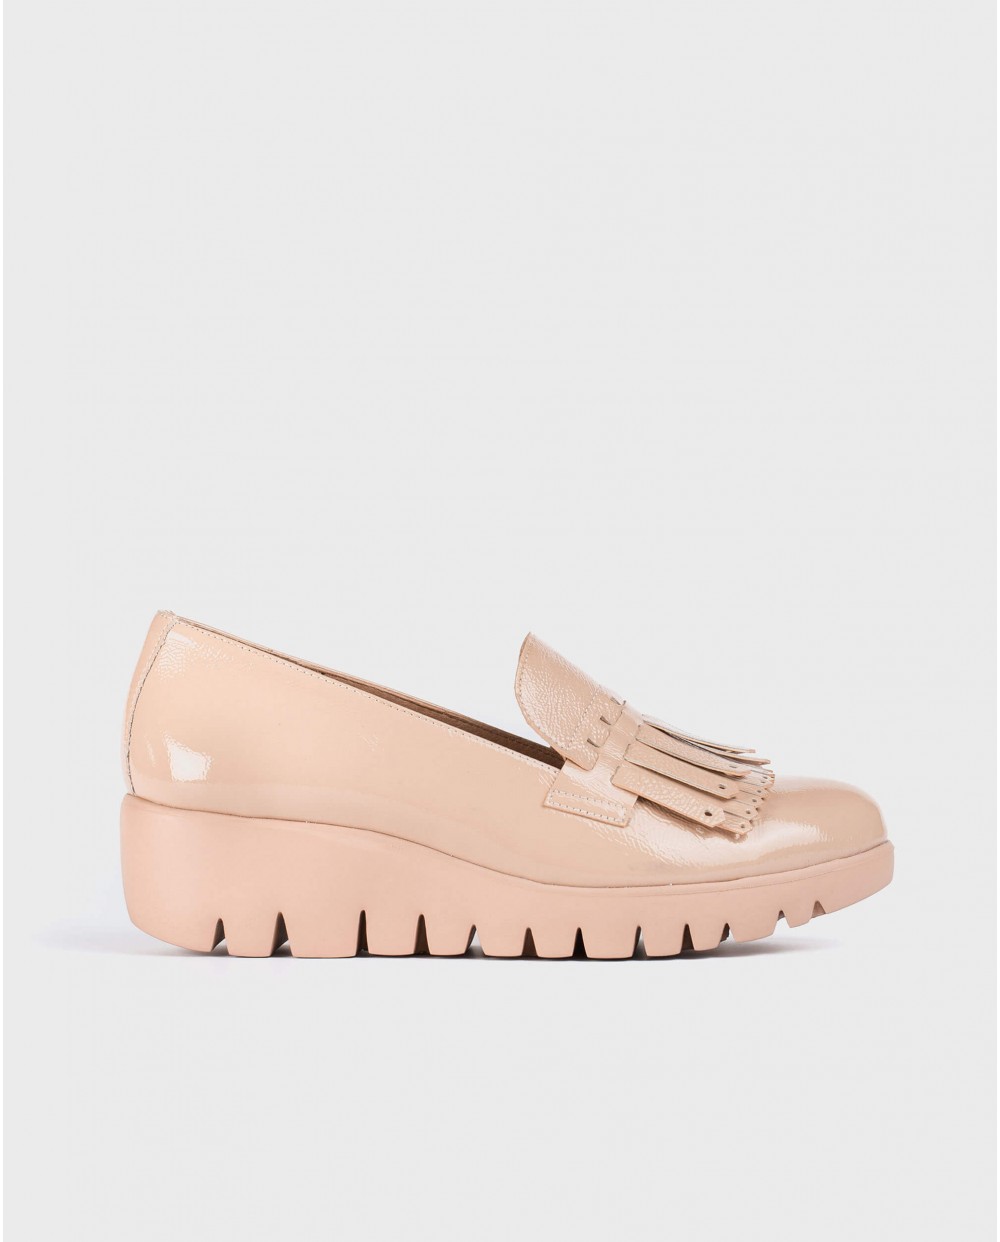 Wonders-Outlet-Patent leather moccasin with fringe detail